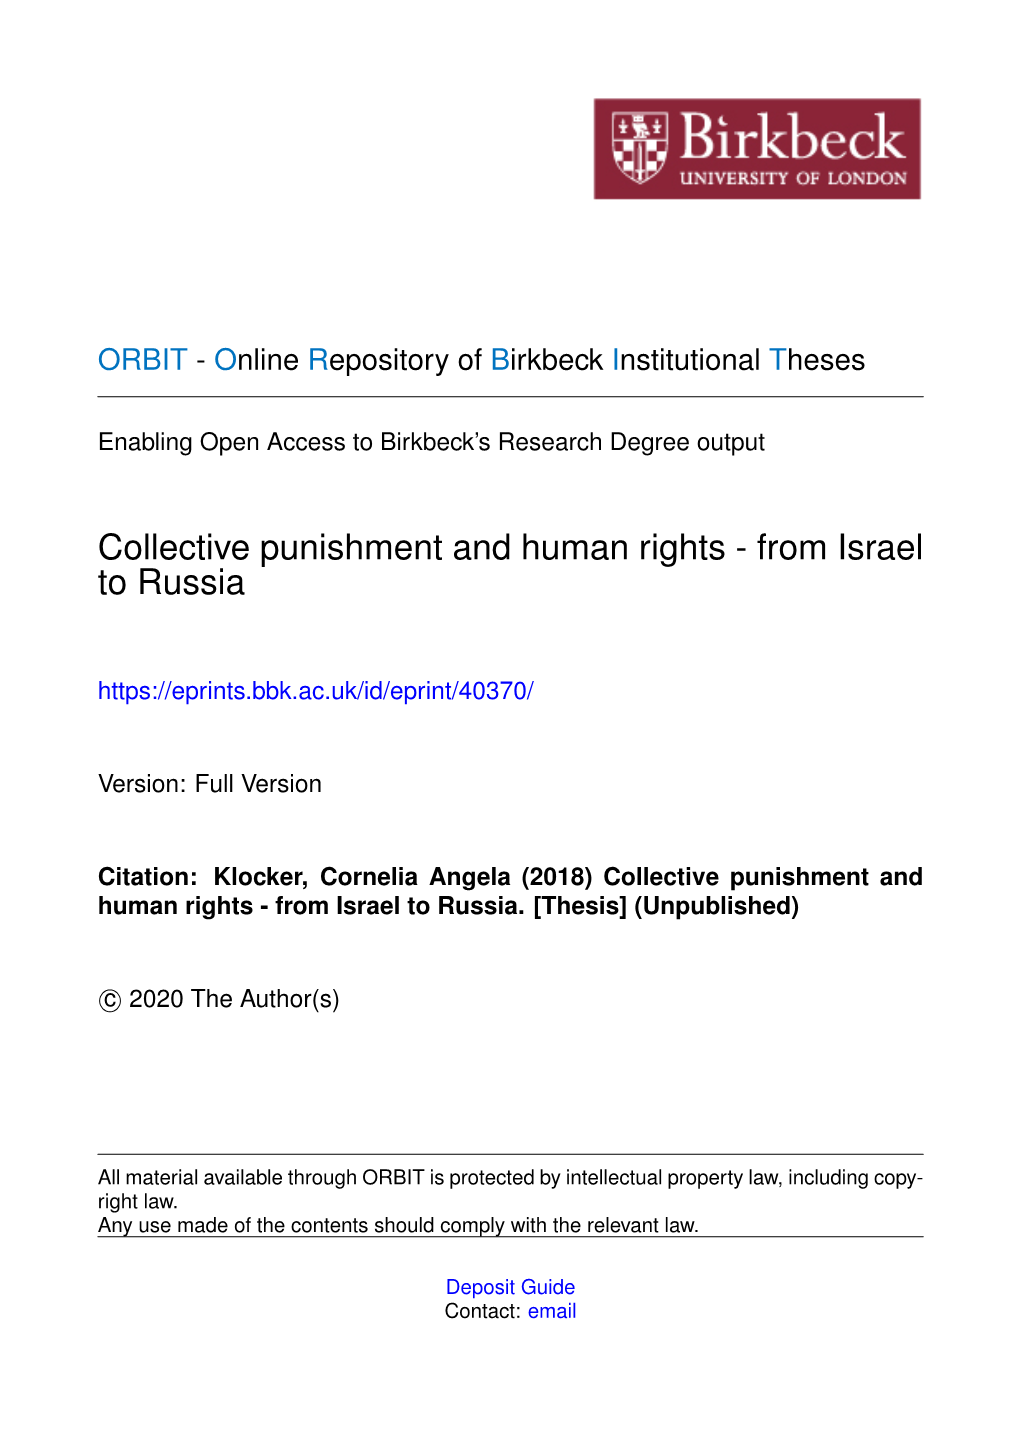 Collective Punishment and Human Rights - from Israel to Russia